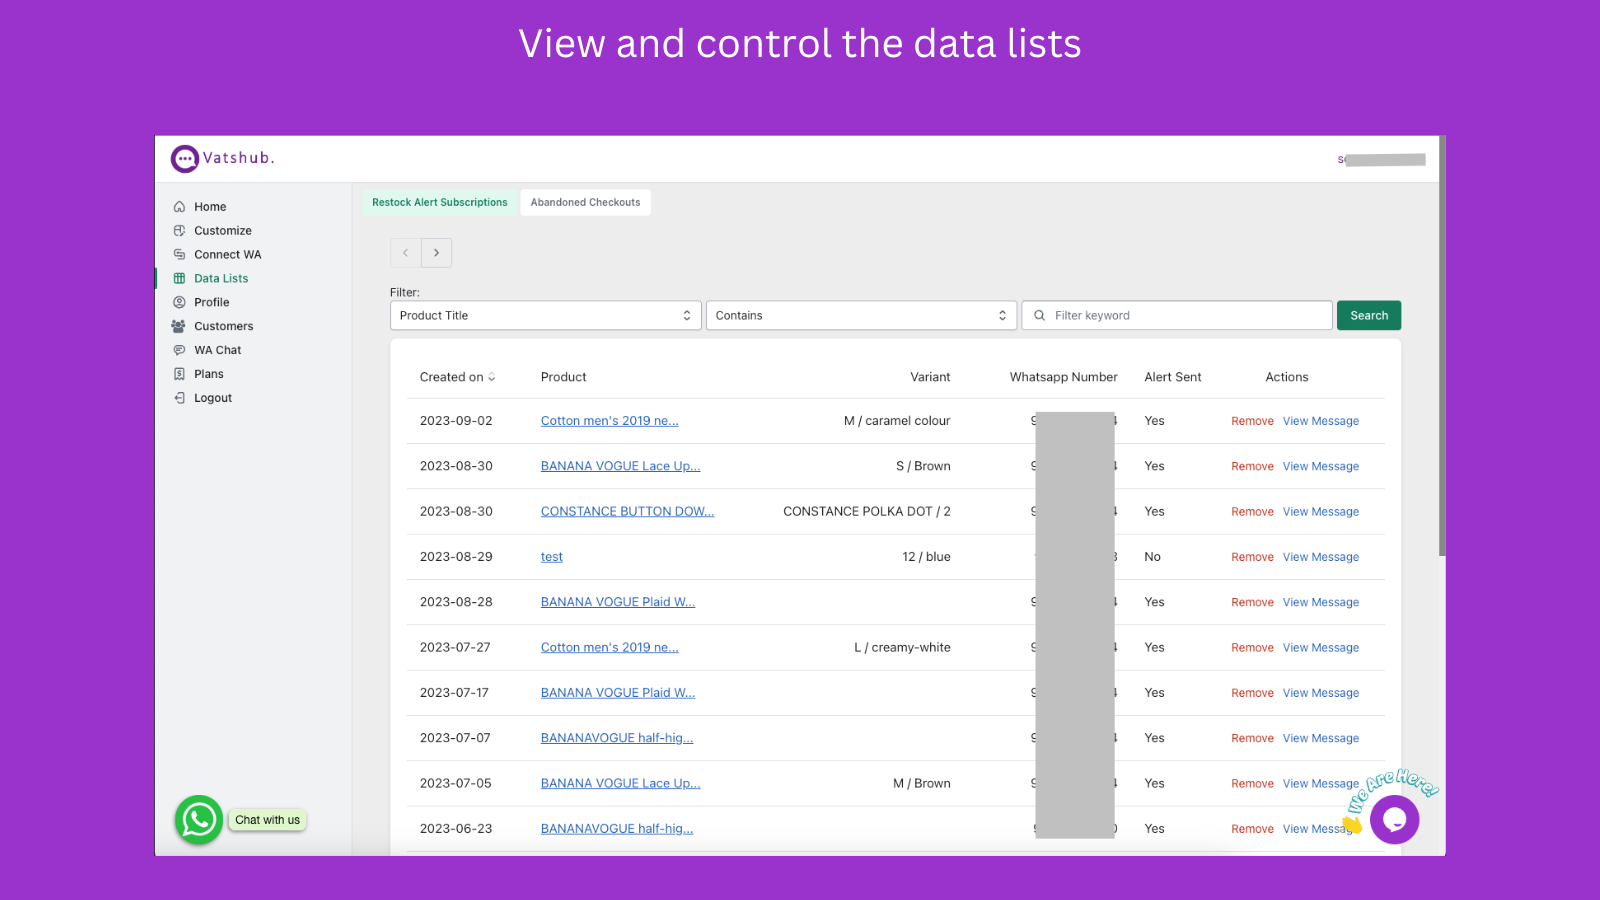 View and control the data lists